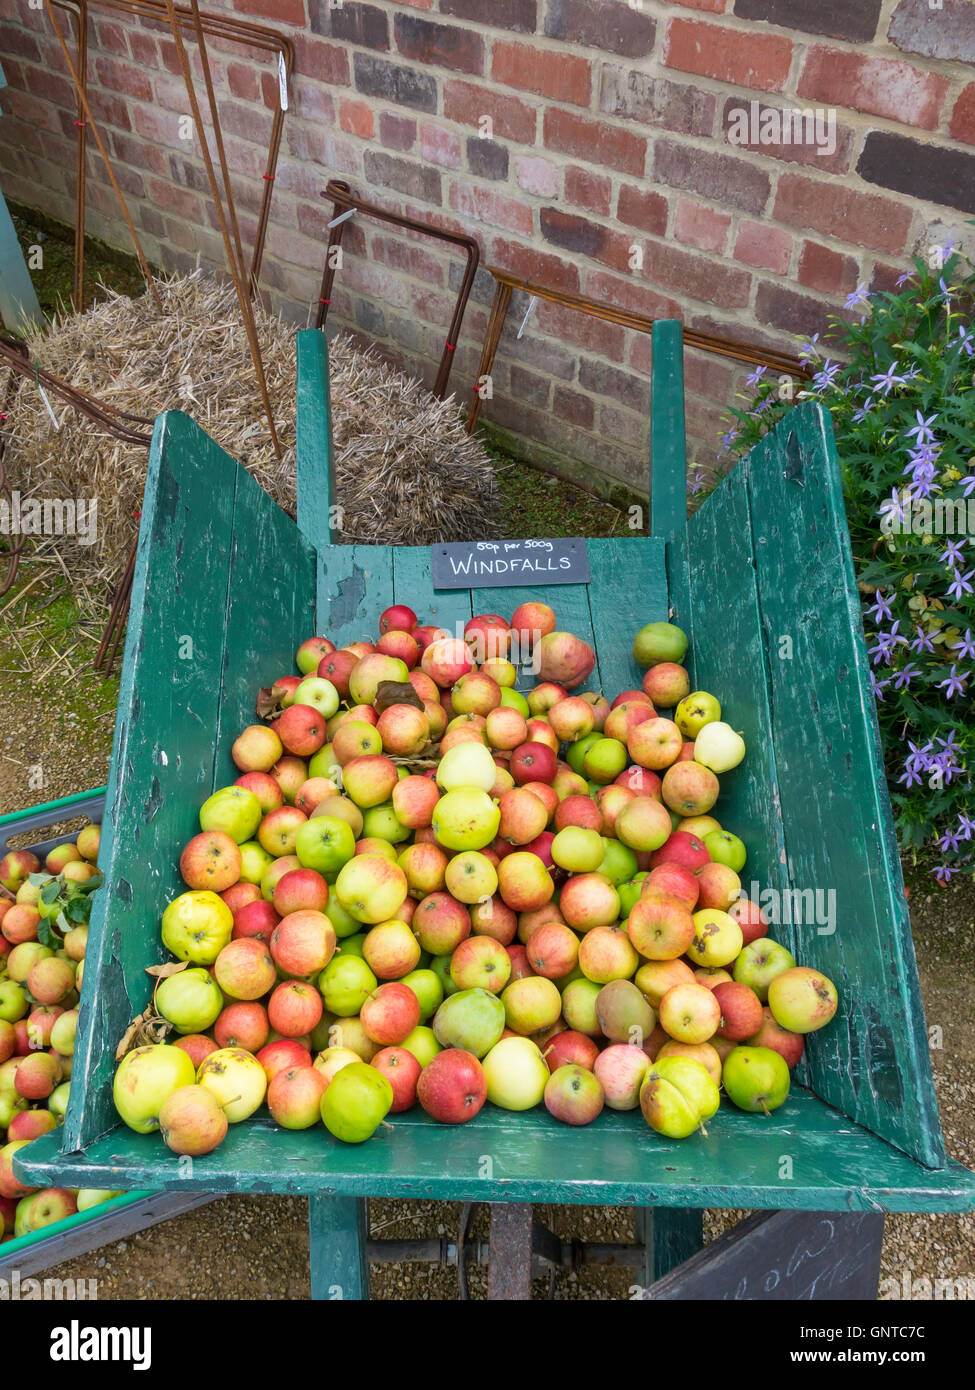 Yellow and red windfall apples, displayed in a wooden wheelbarrow, for sale in a garden centre Stock Photo